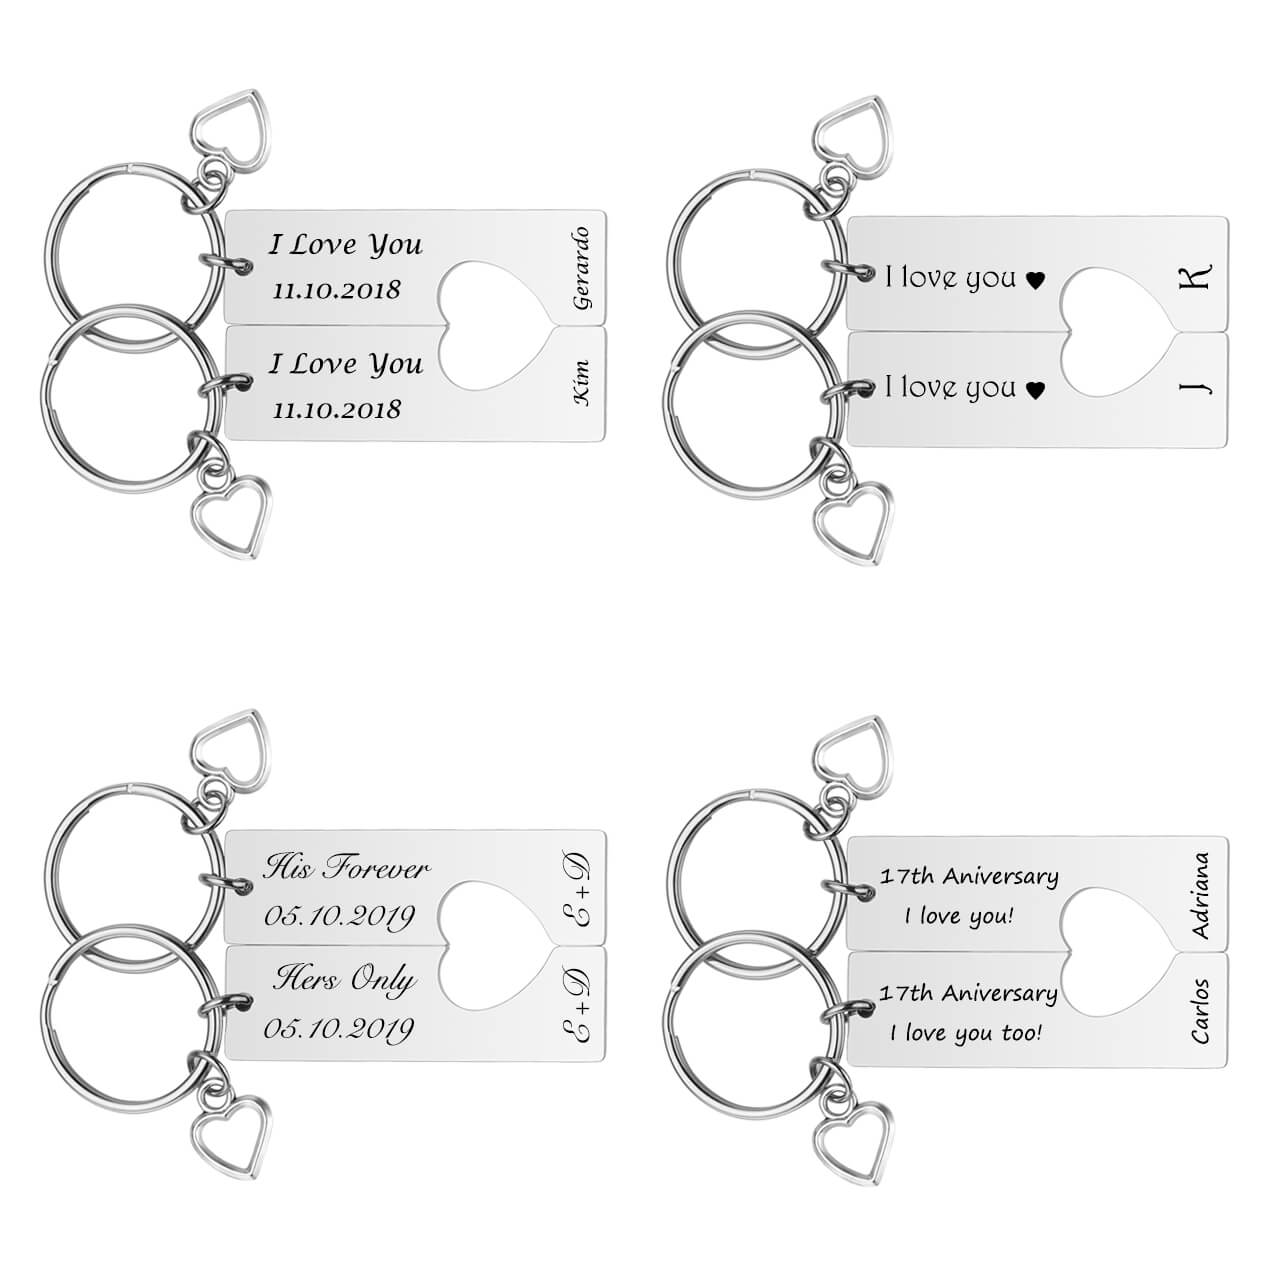 jnf009001 jovivi personalized custom rectangle keychain set for him and her